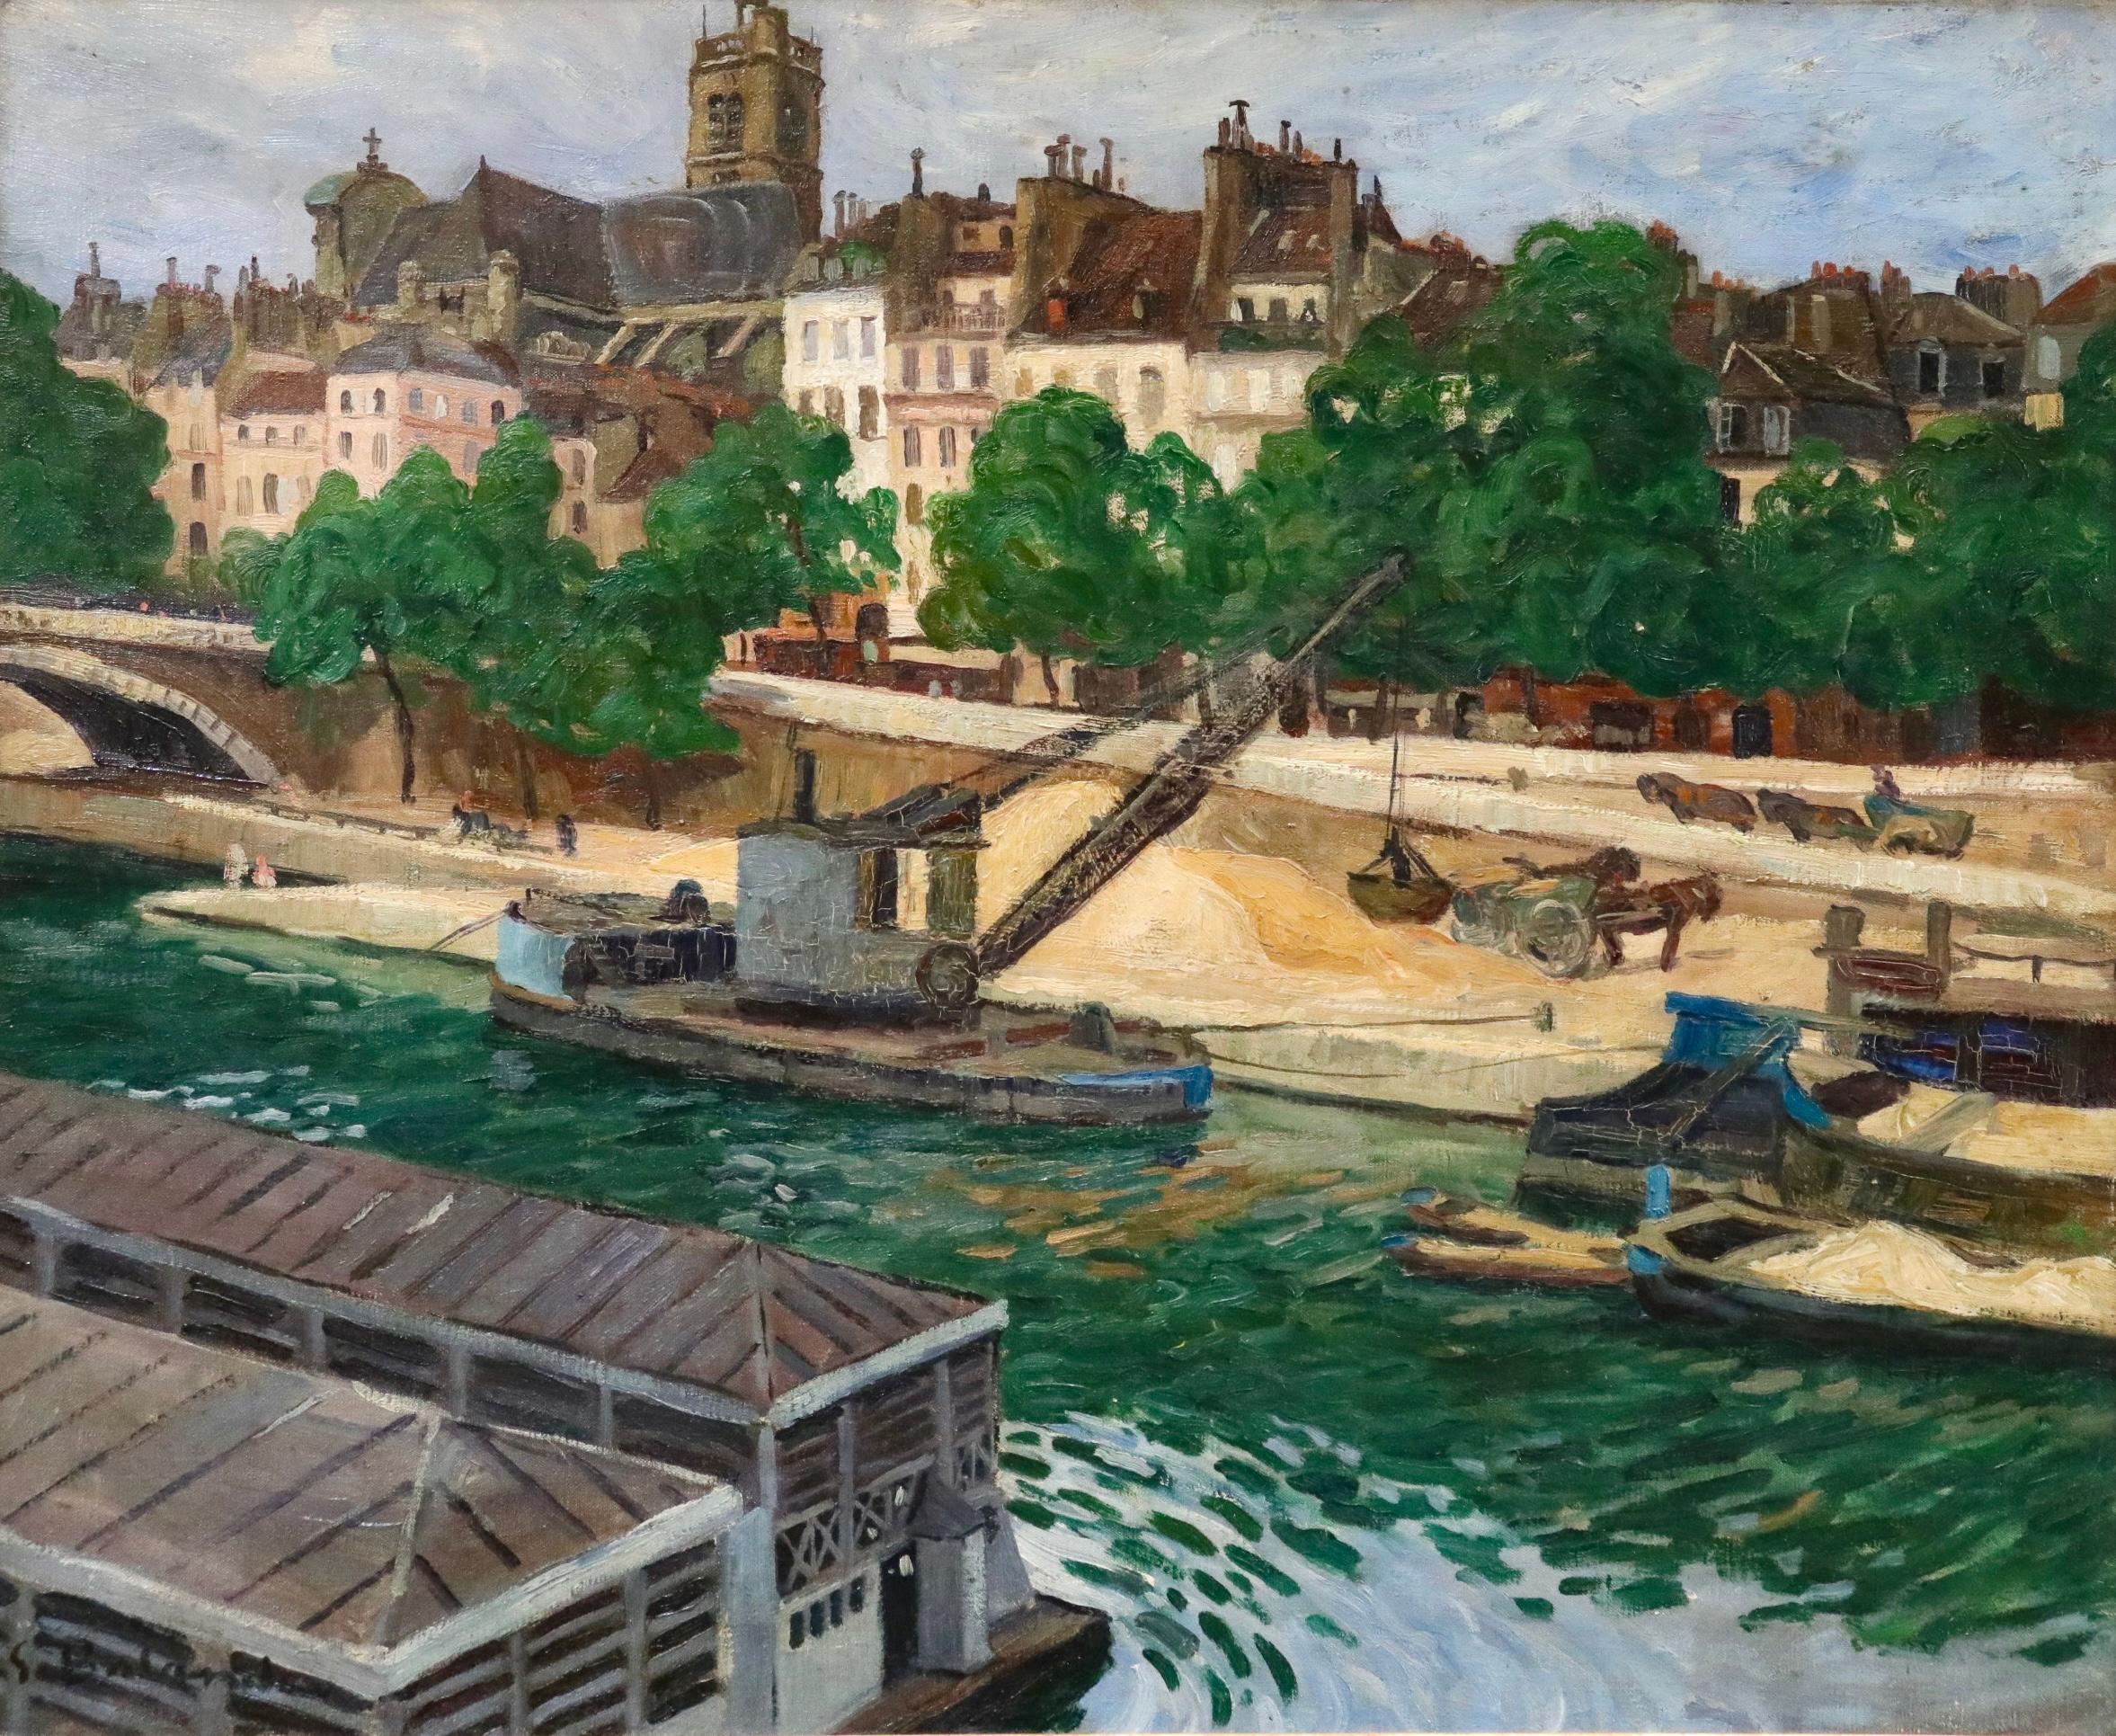 Workers on the Seine - Post Louis-Philippe - River Landscape Oil by G Balande - Painting by Gaston Balande